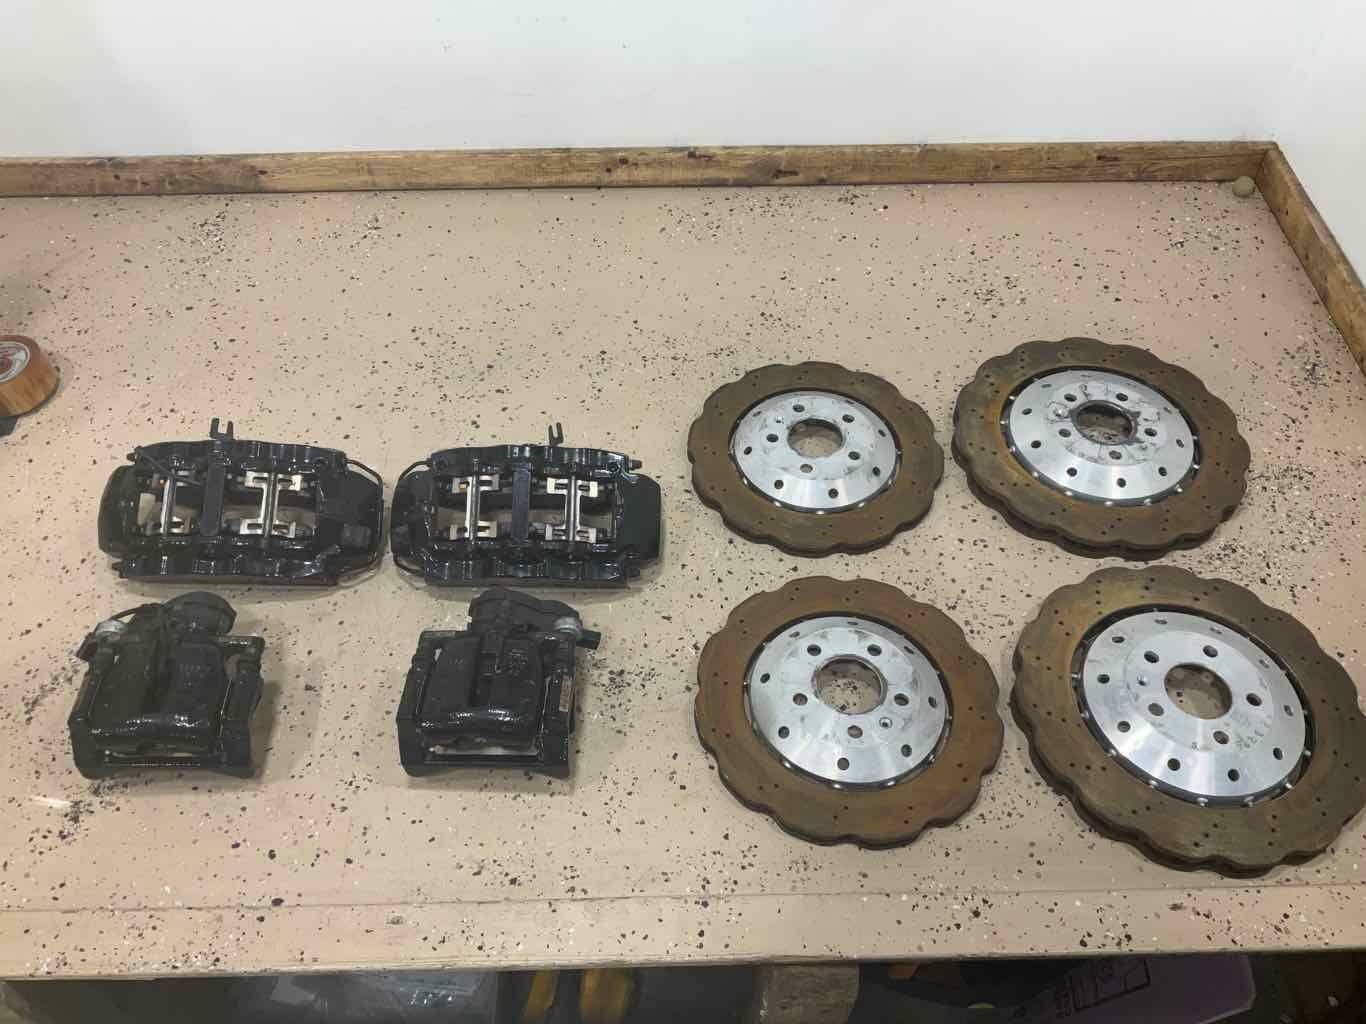 2013-2015 Audi RS5 OEM Brembo Brakes Set with Rotors (8 Piston Fronts)